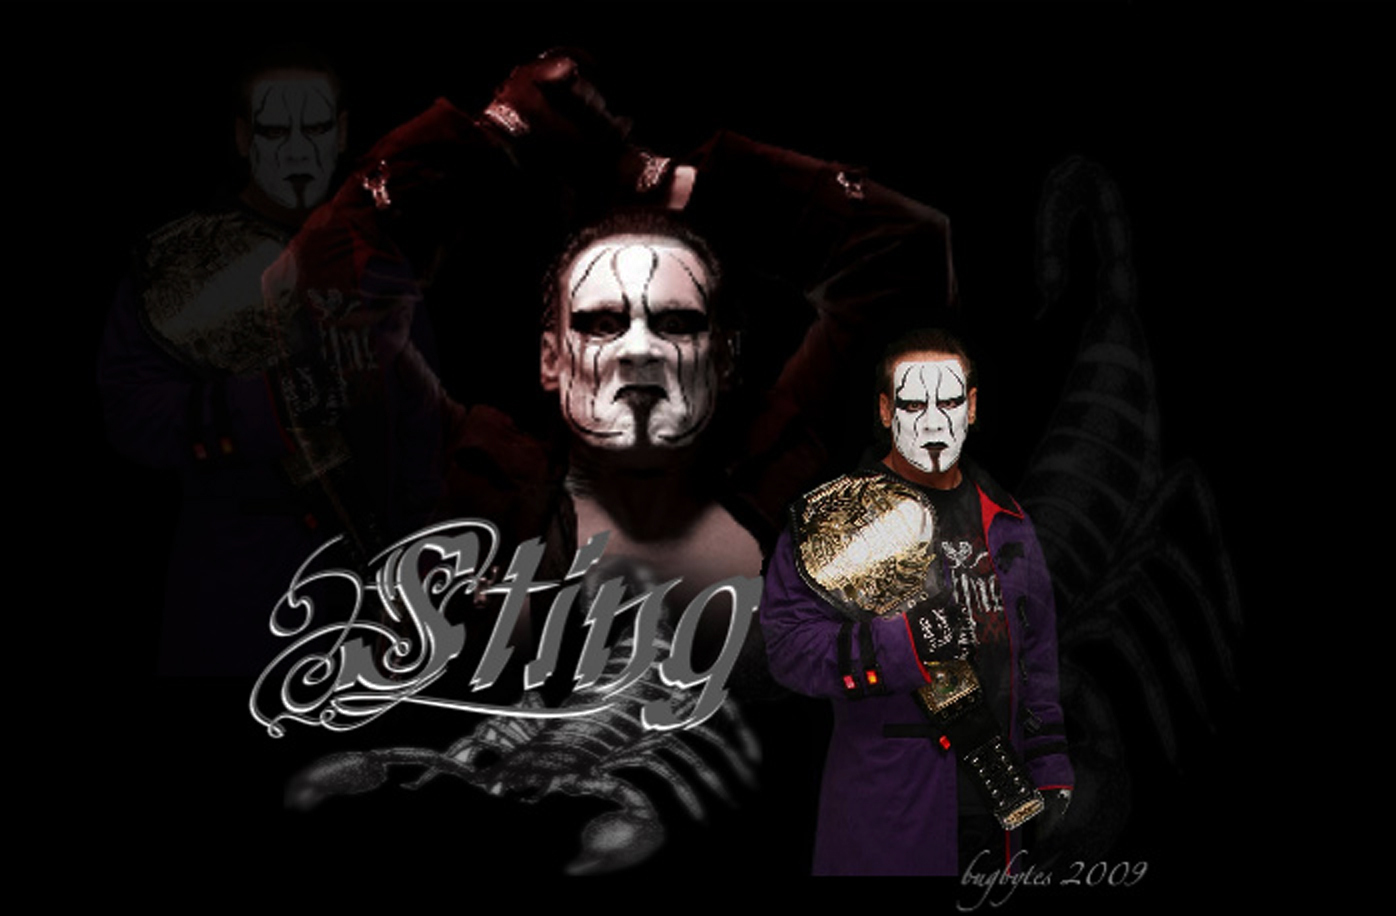 Sting Wcw Image HD Wallpaper And Background Photos